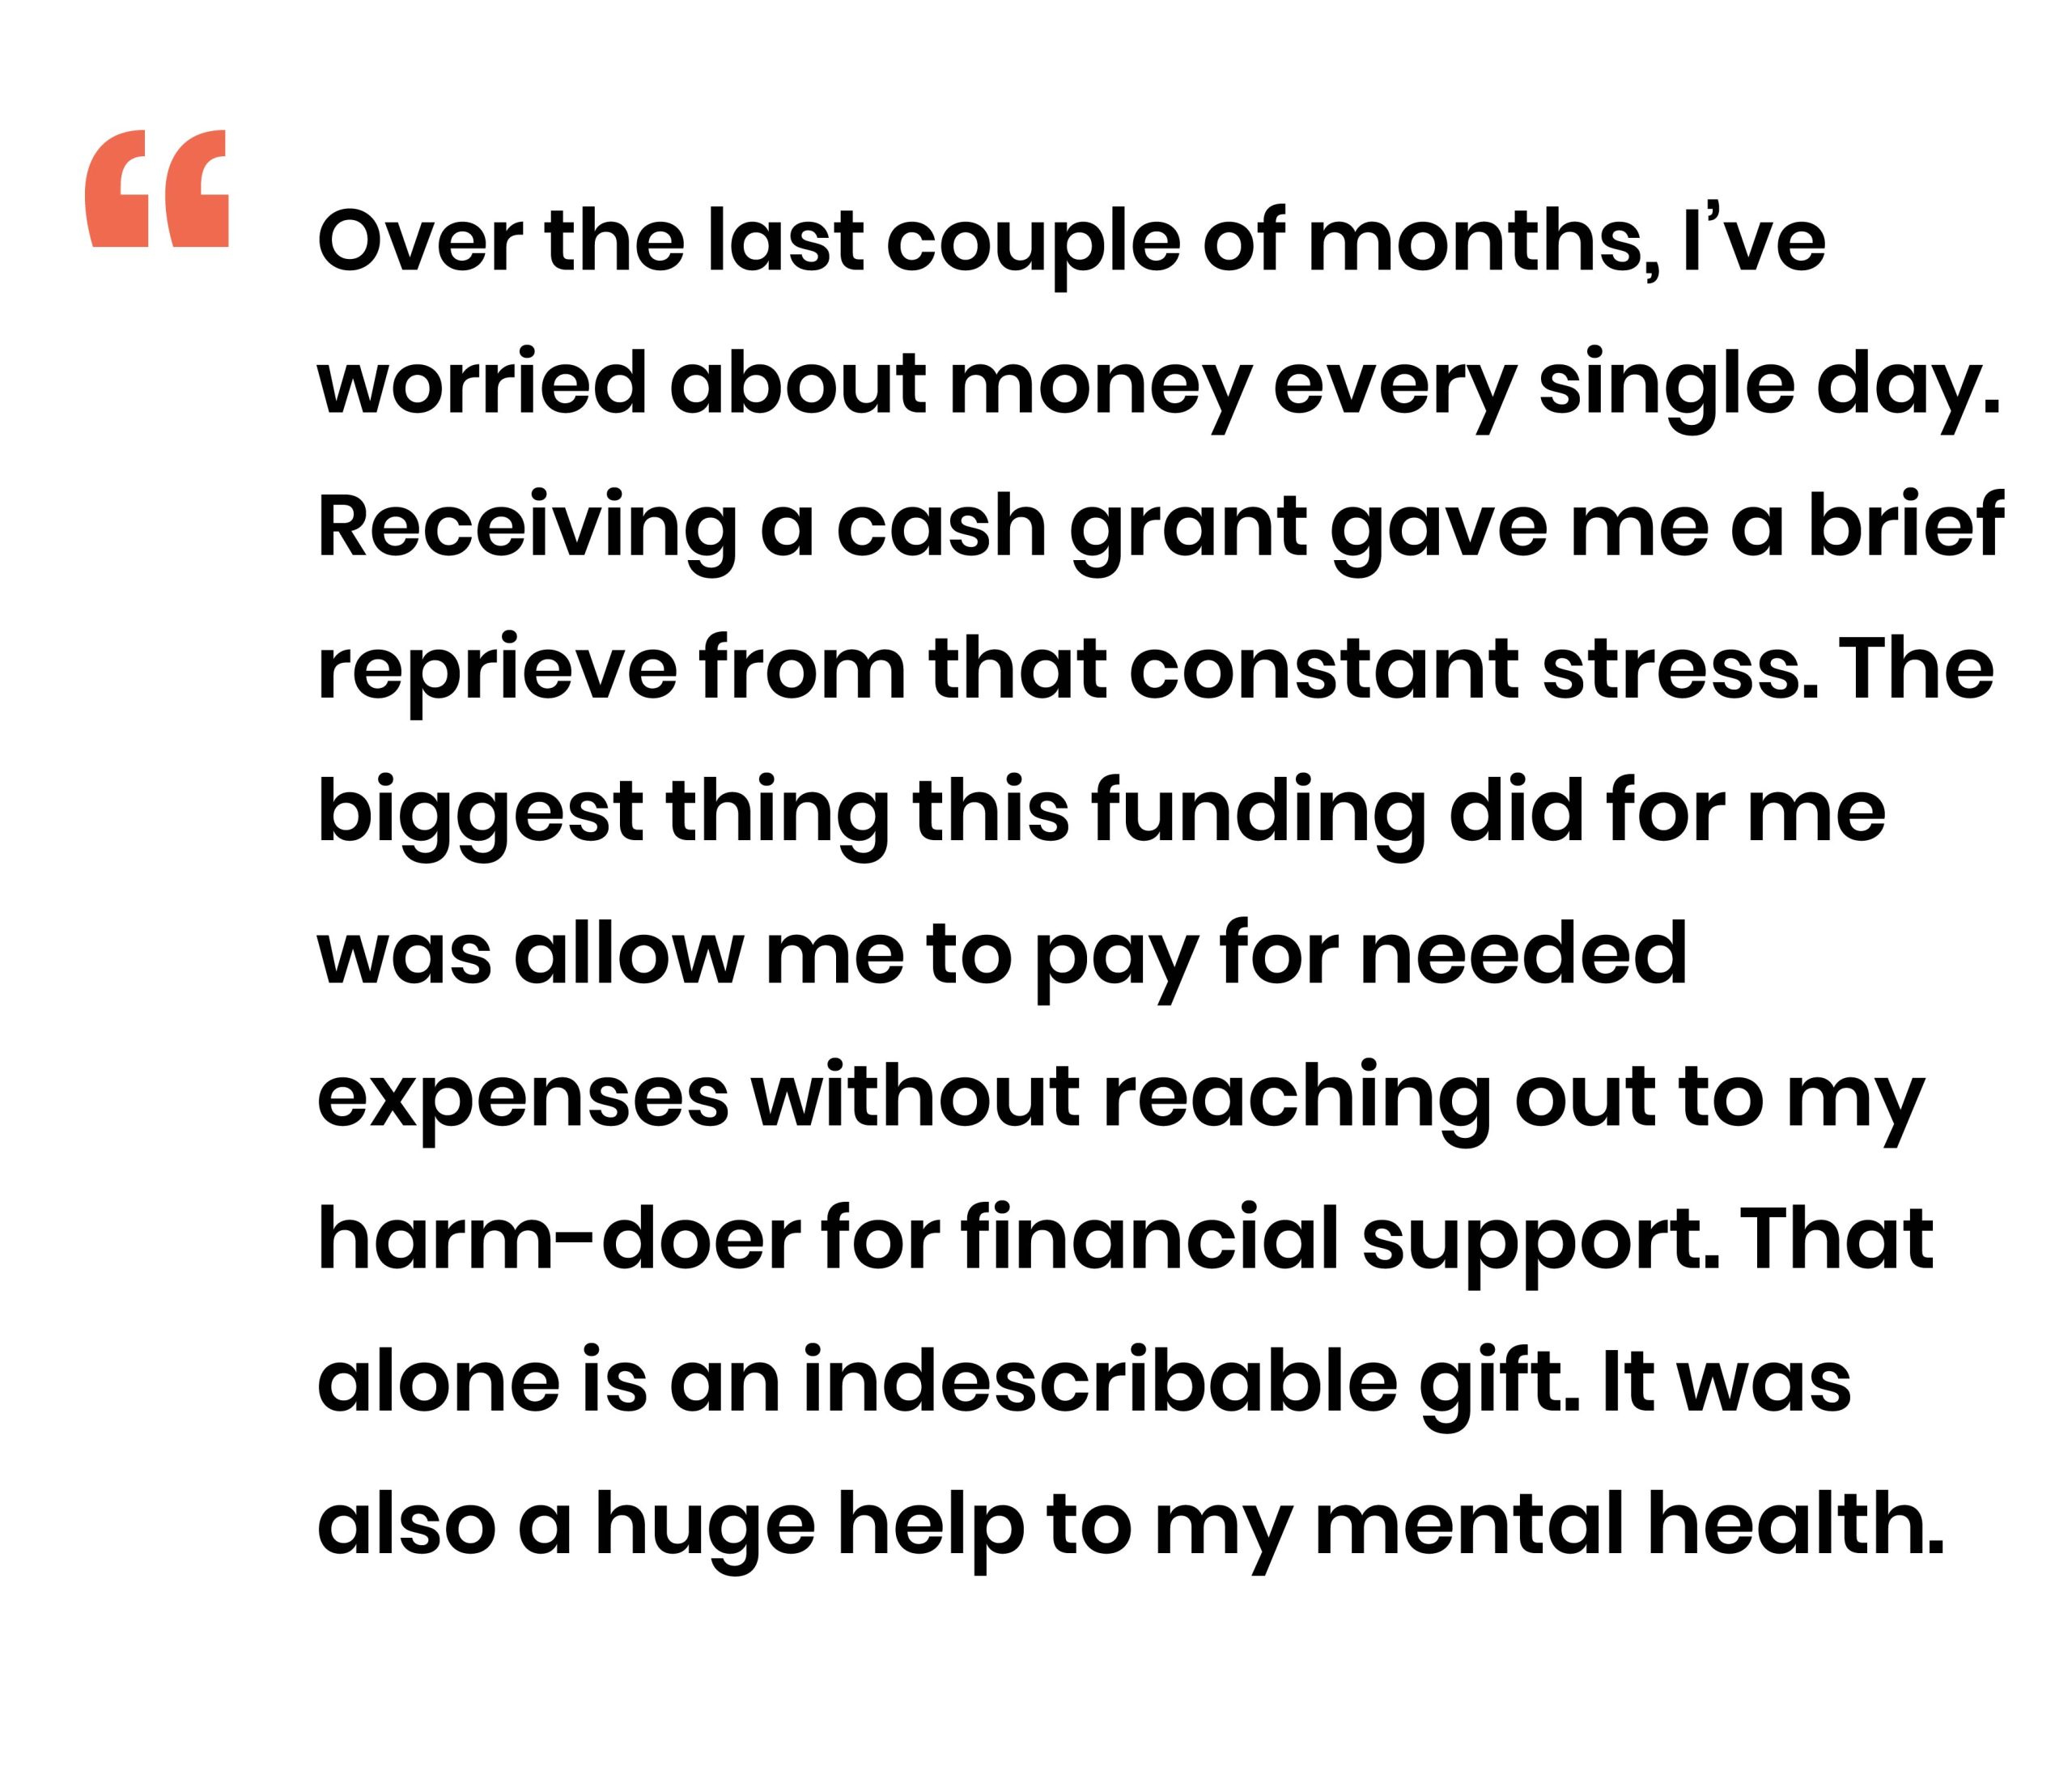 Over the last couple of months Ive worried about money every single day Receiving a cash grant gave me a brief reprieve from that constant stress The biggest thing this funding did for me was allow me to pay for needed expenses without reaching out to my harm-doer for financial support That alone is an indescribable gift It was also a huge help to my mental health